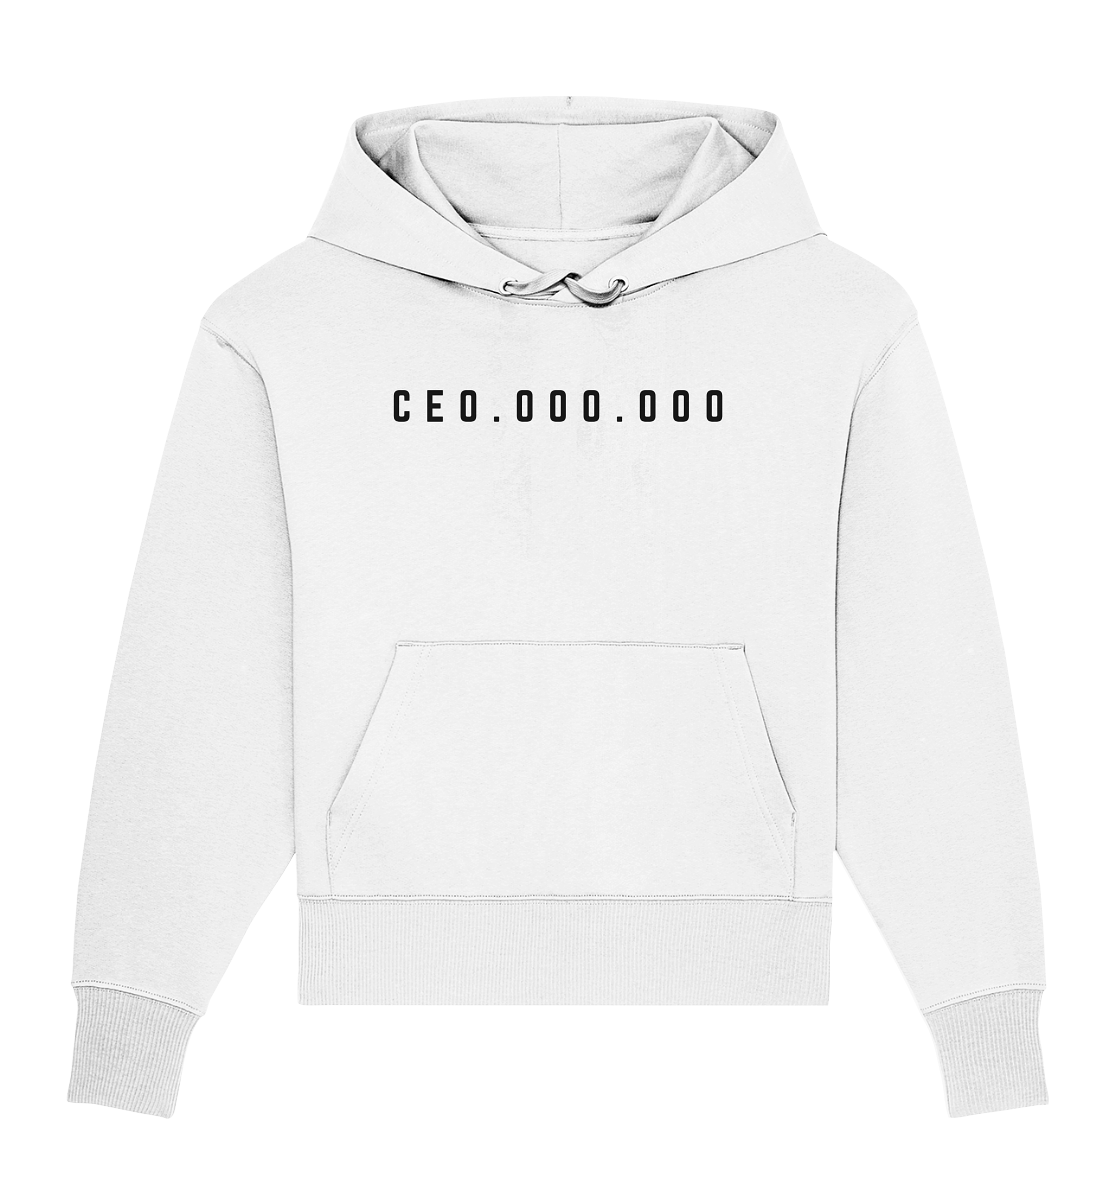 CEO.OOO.OOO COLLECTION by LIMITLOS - Organic Oversize Hoodie